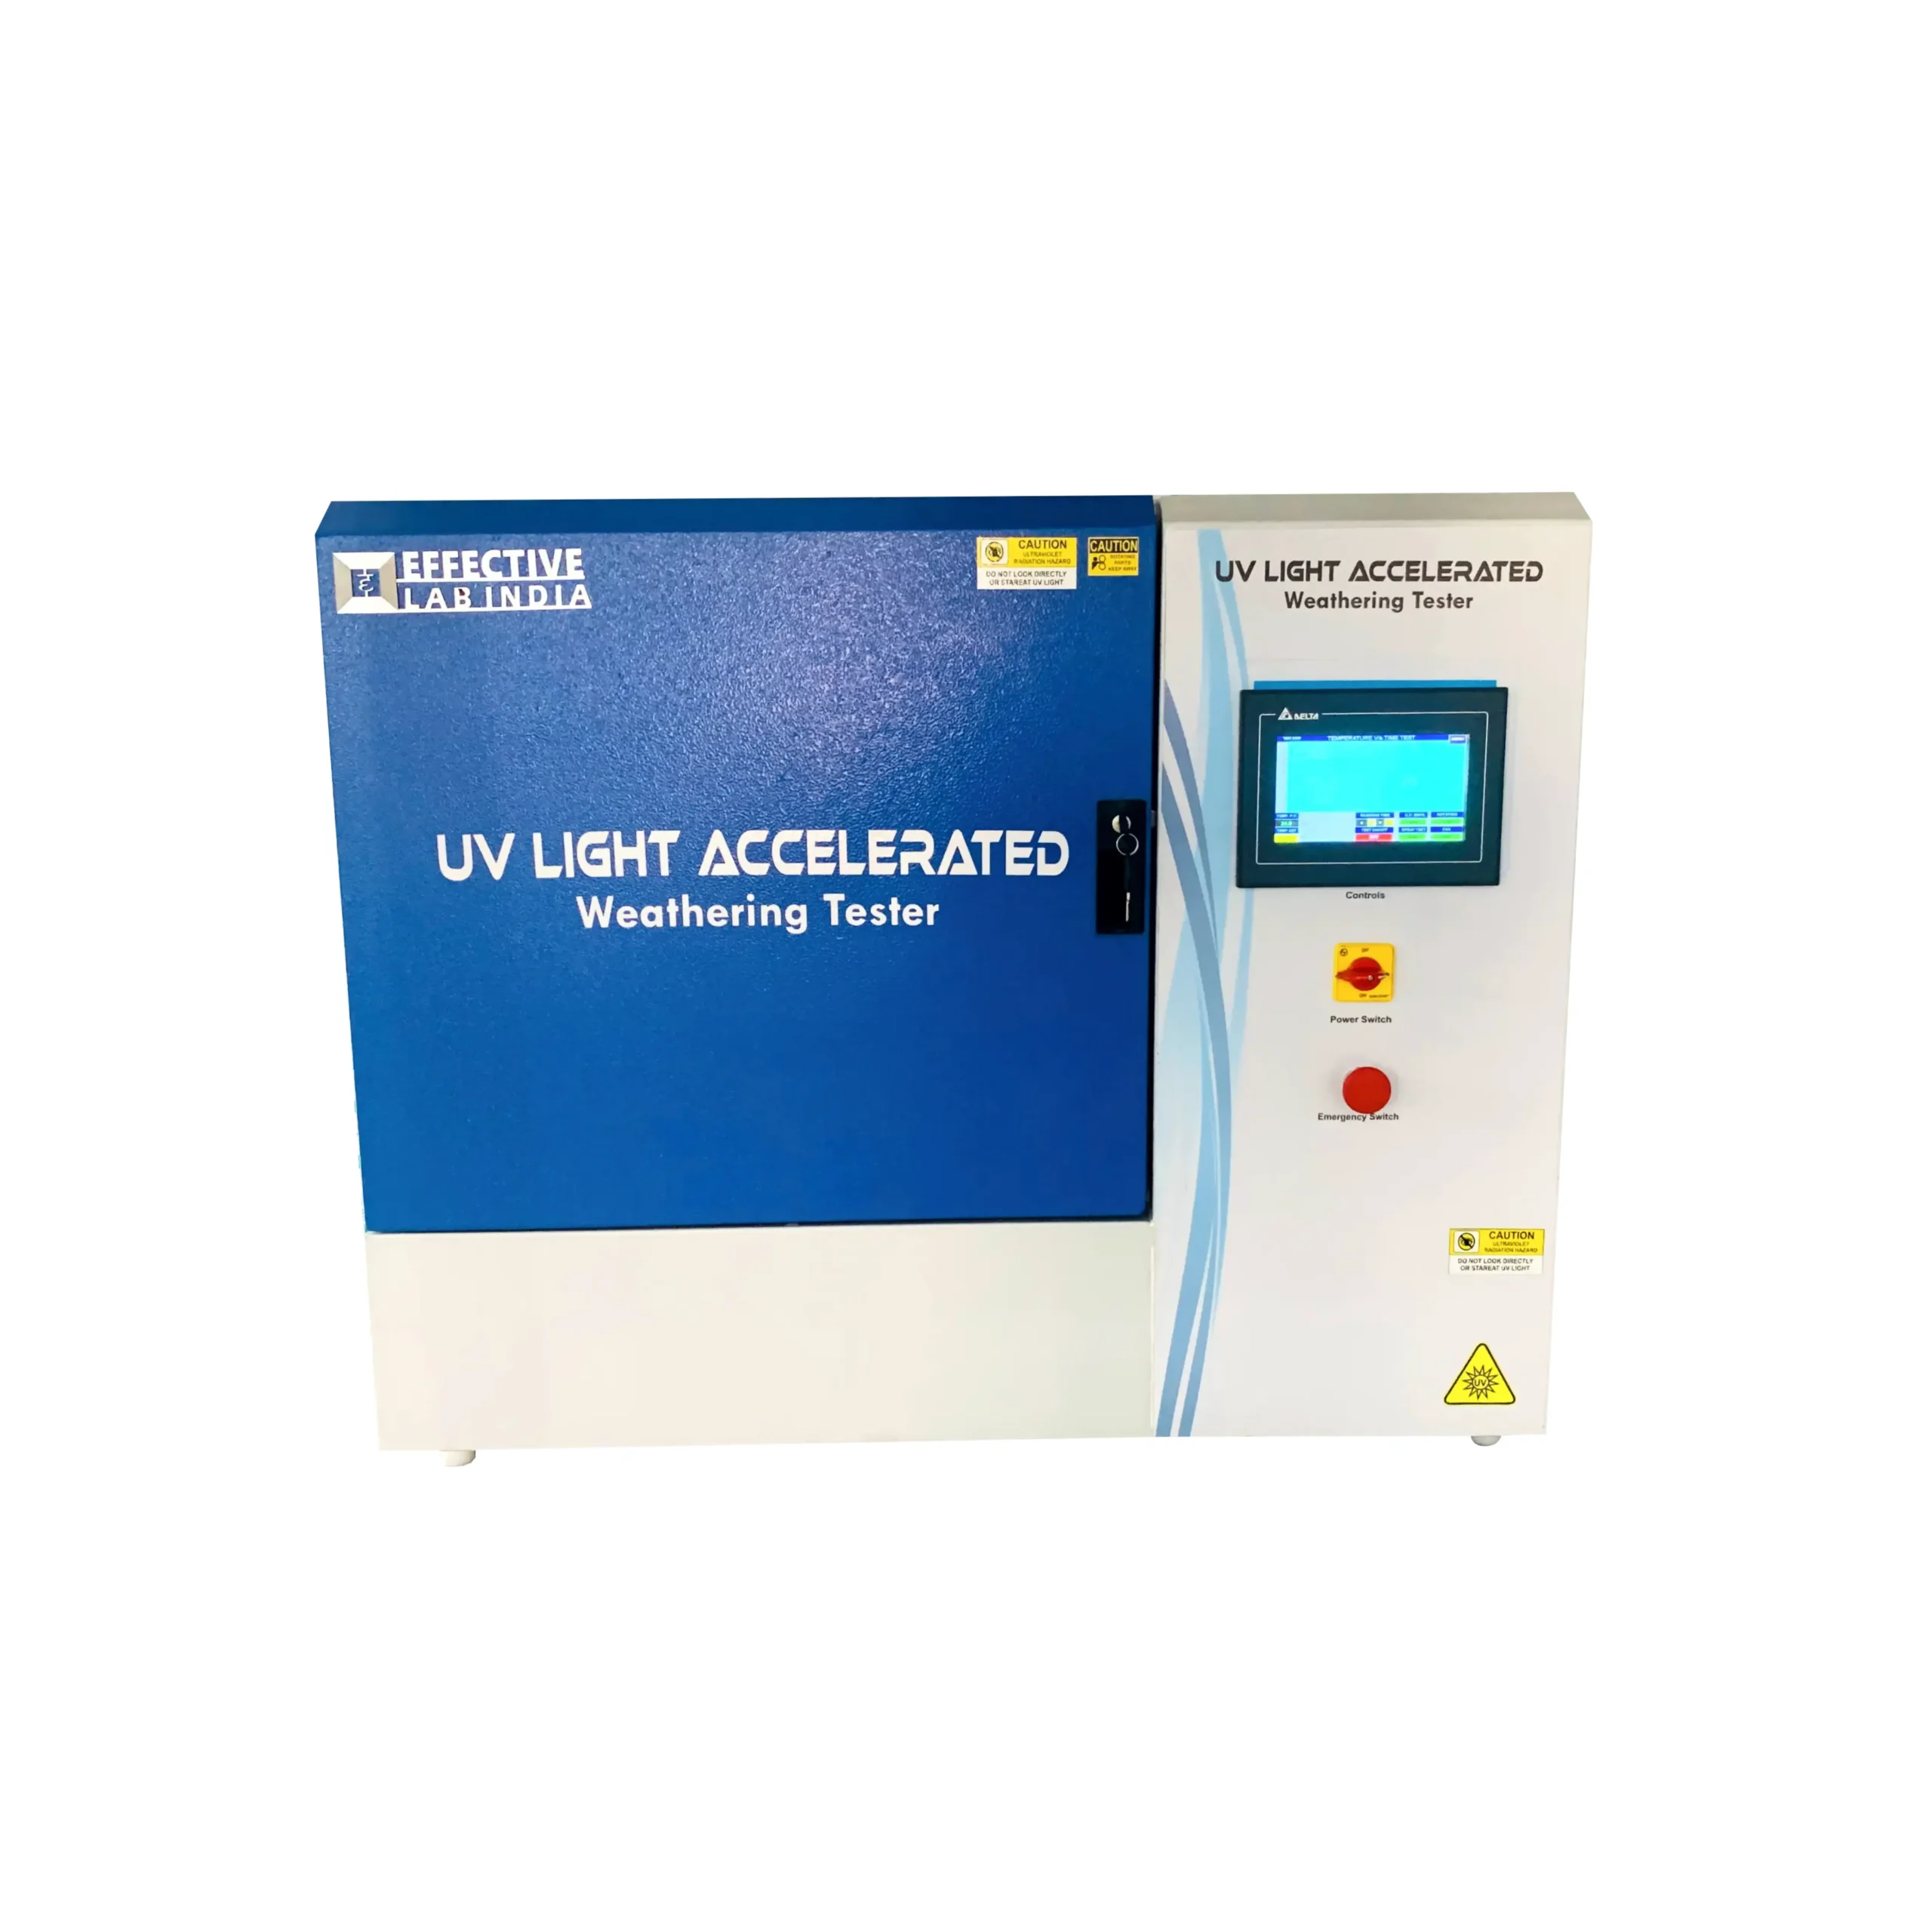 Bench UV light accelerated weathering tester